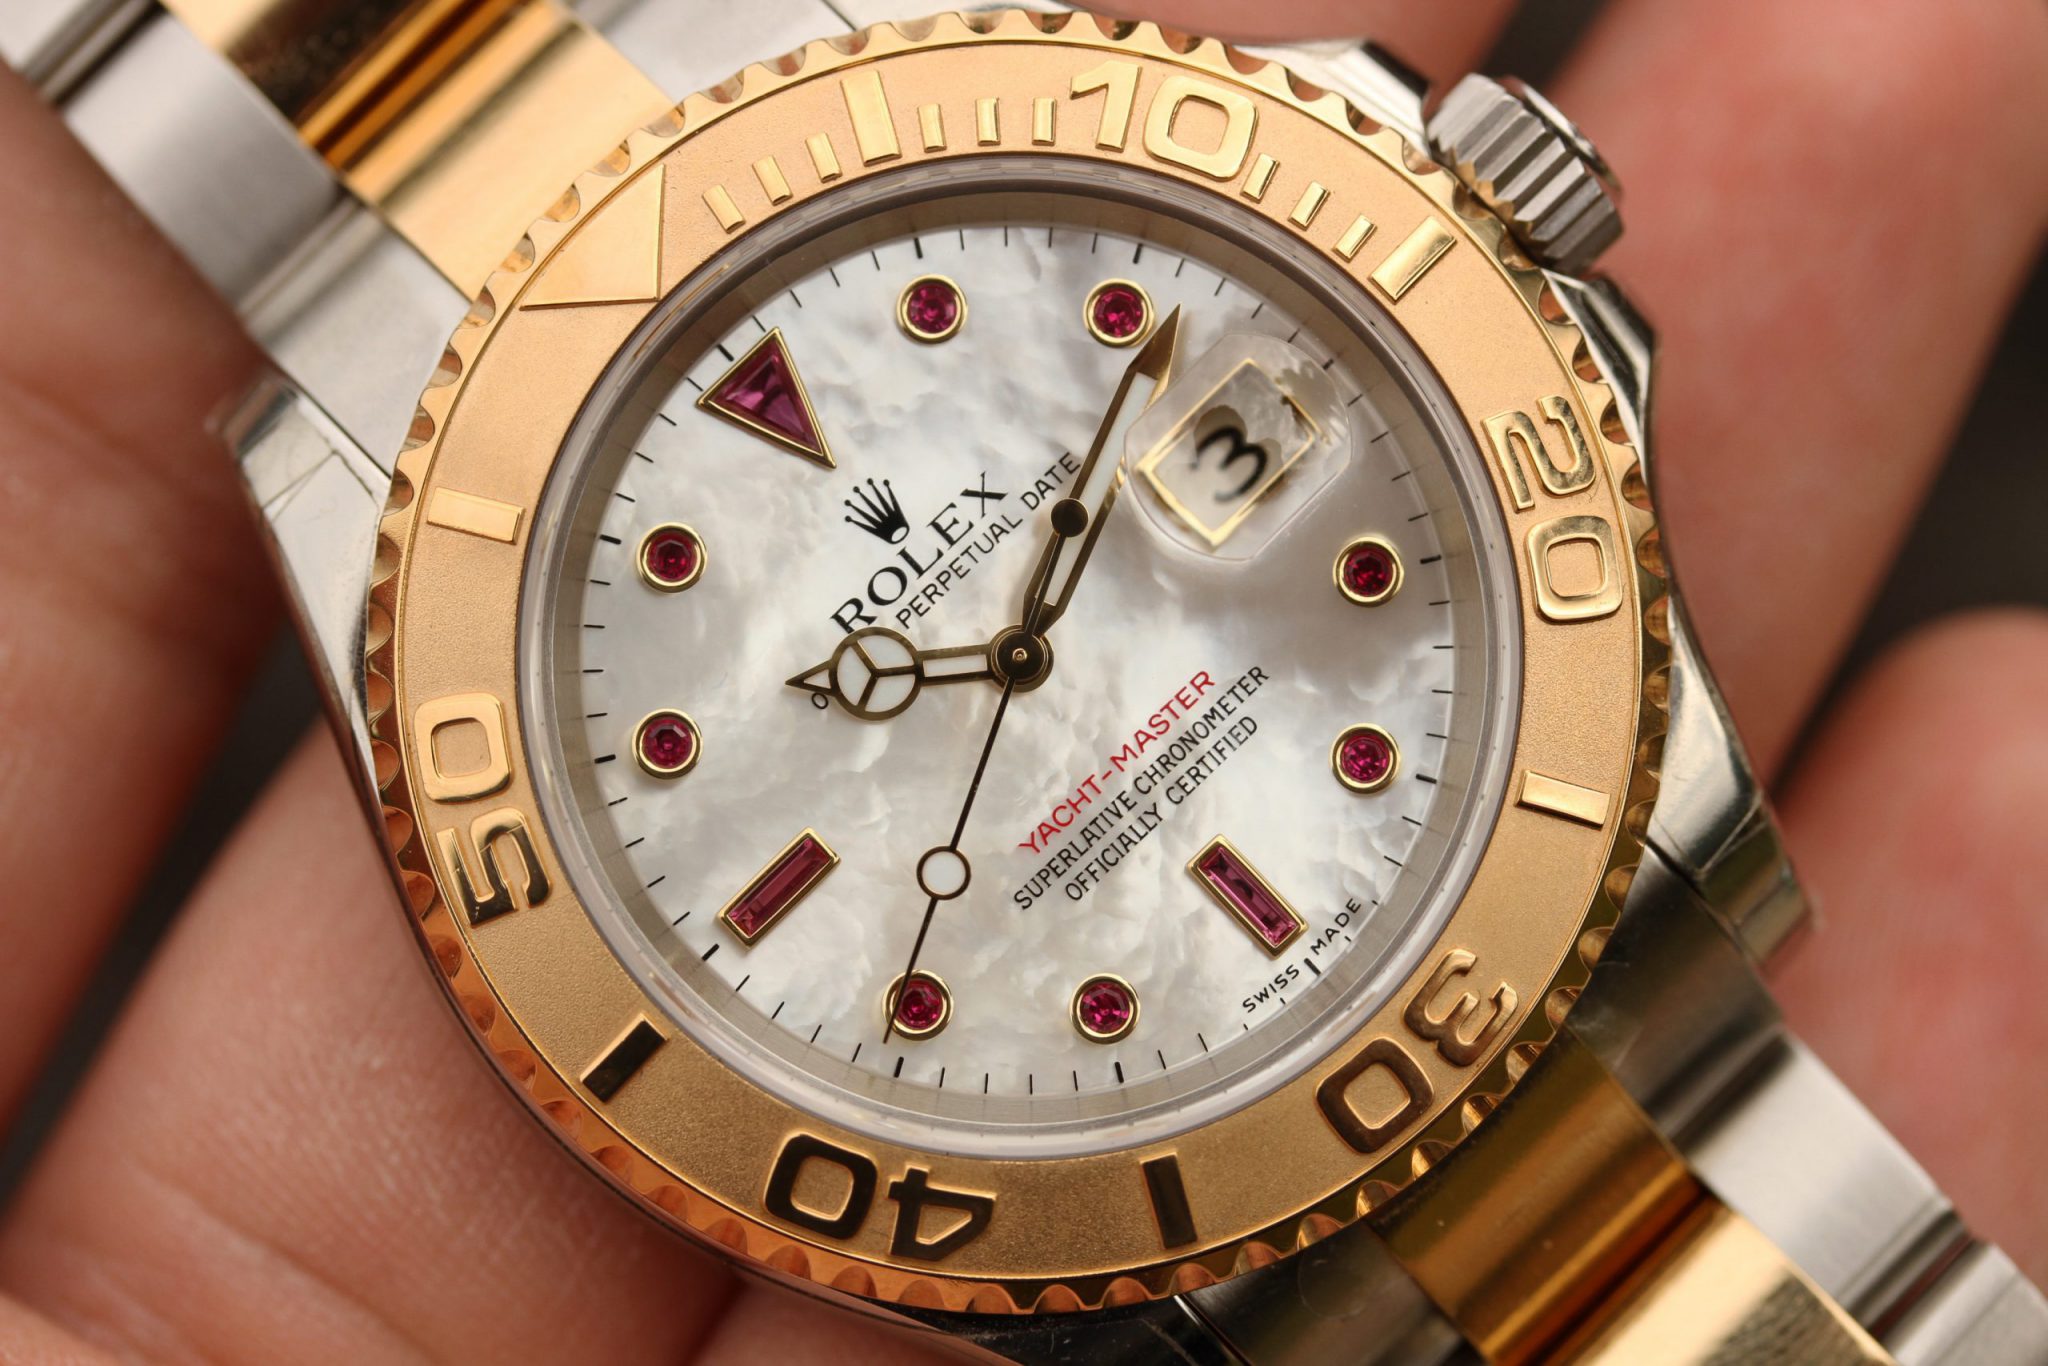 New Old Stock 2006 Rolex Yacht-Master ref. 16623 